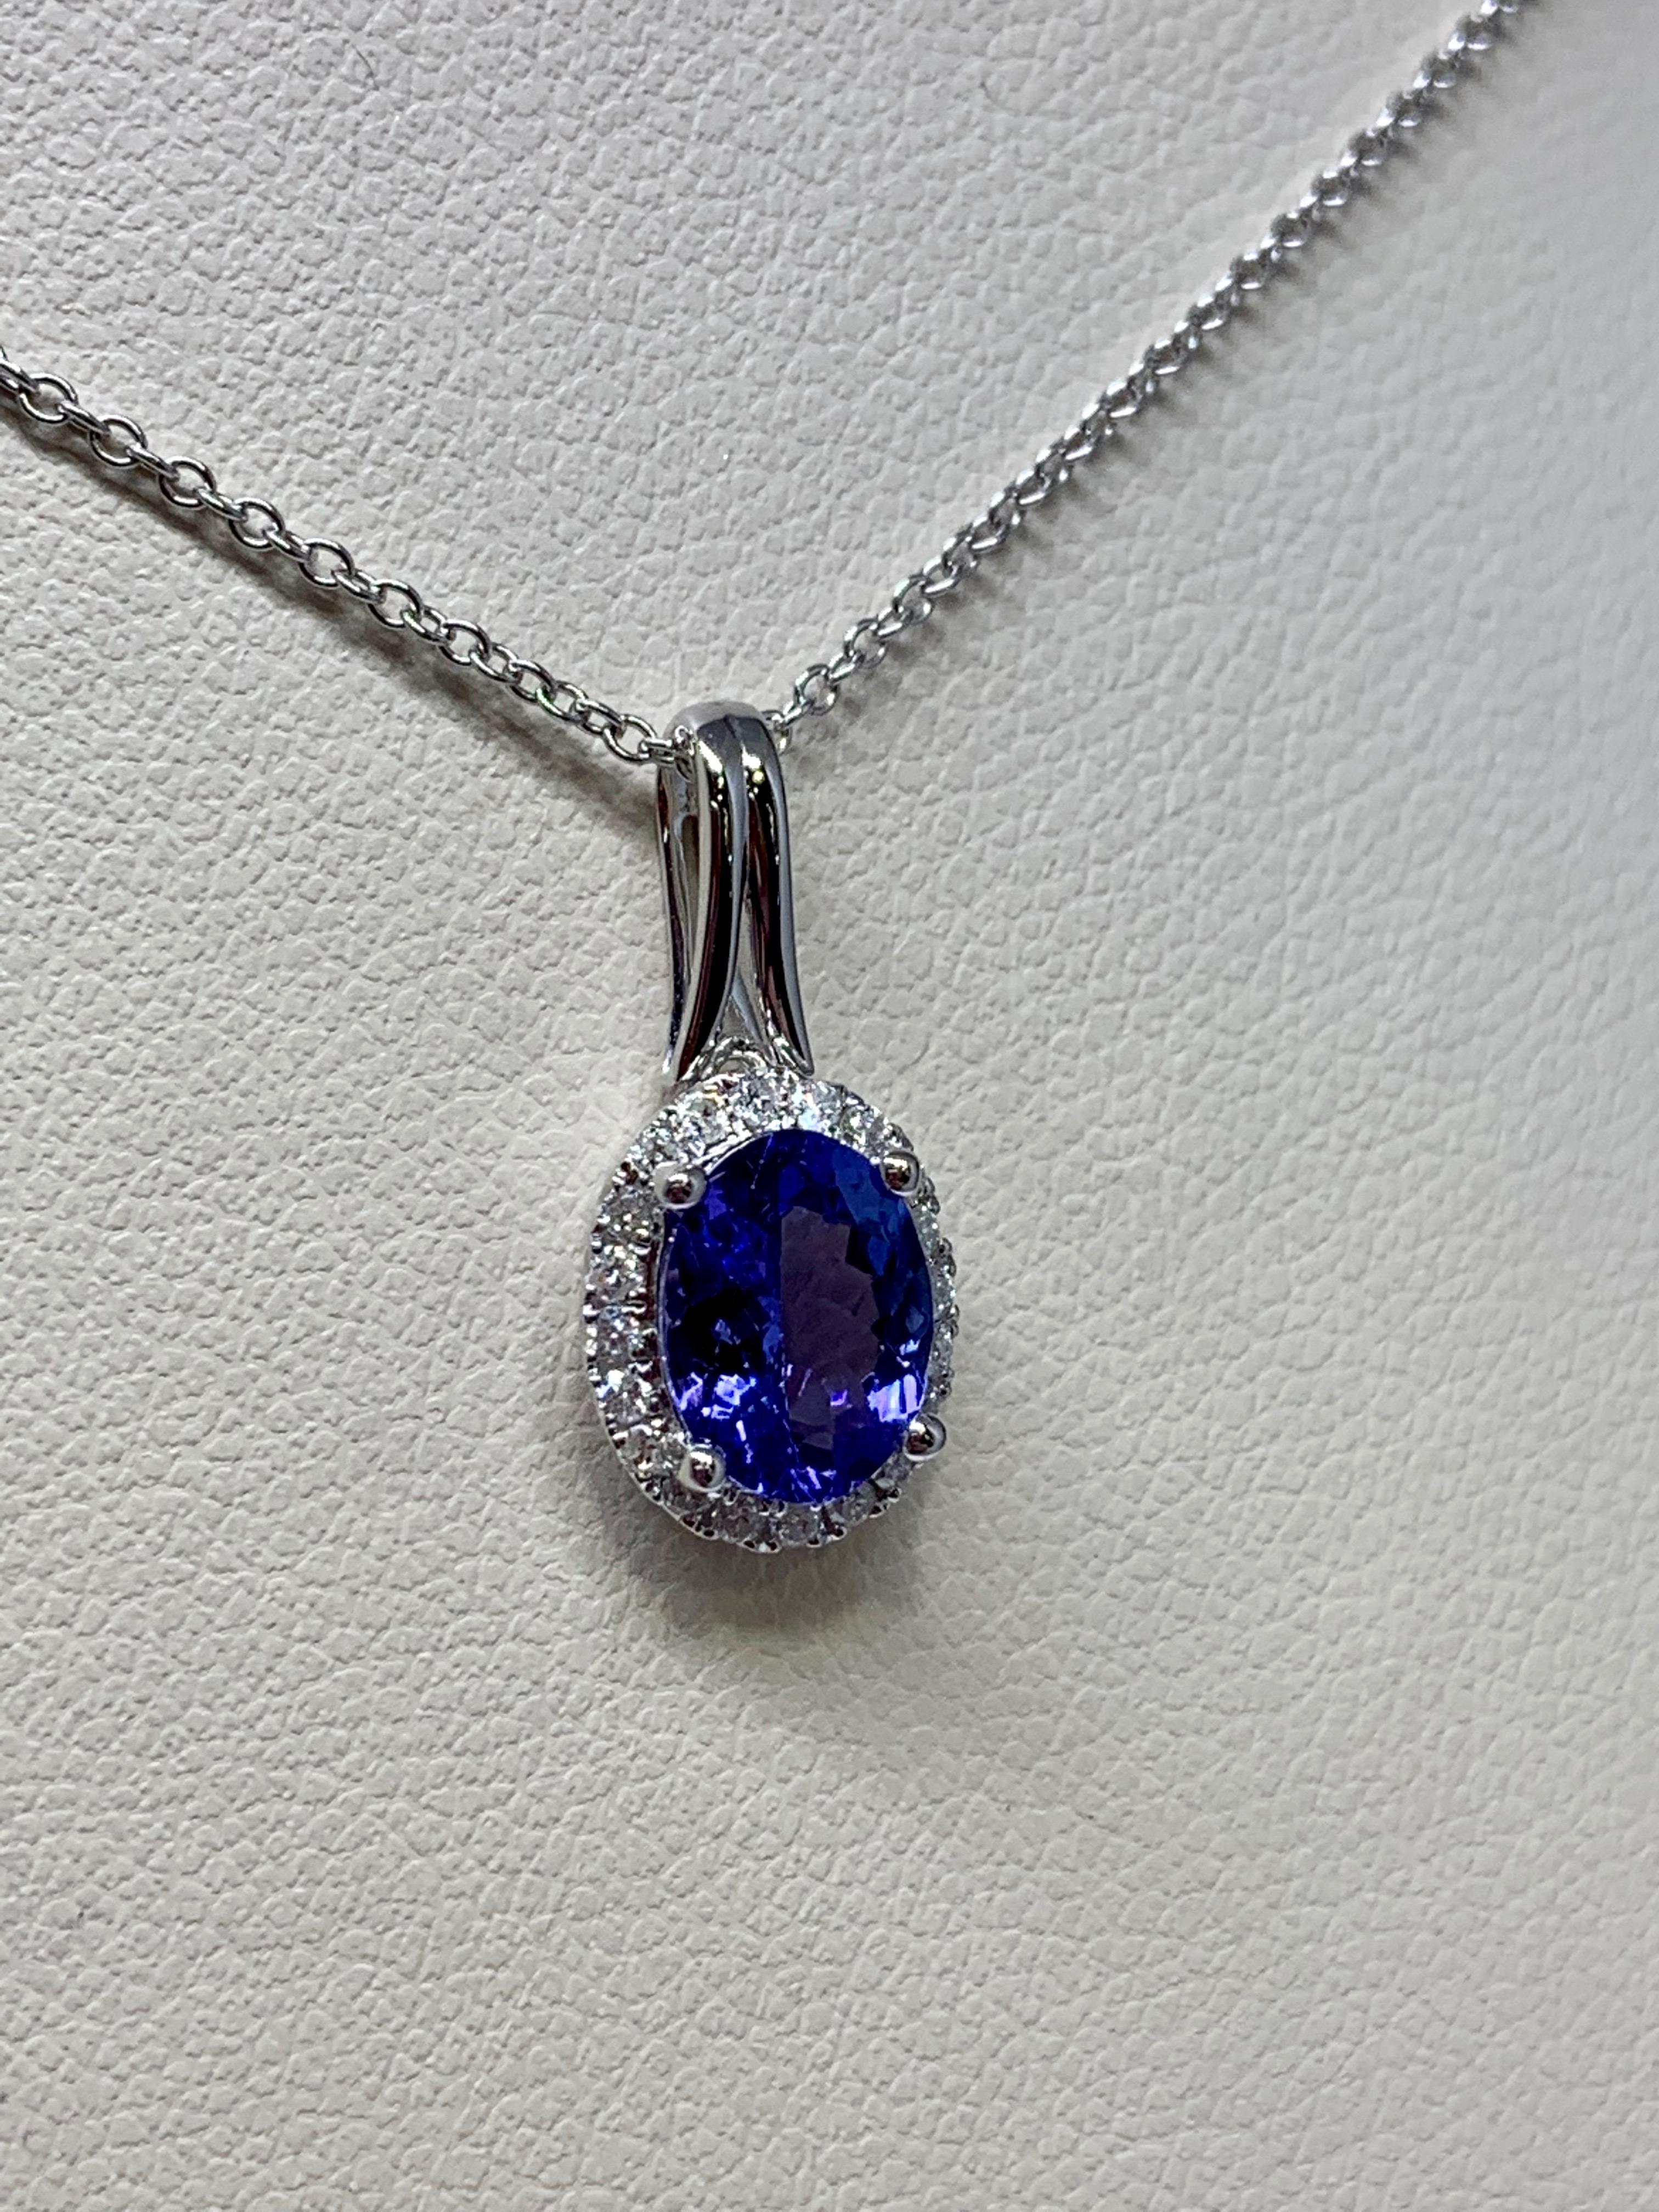 This classic pendant features a beautiful 1.24 carat oval-shaped tanzanite center stone. The vibrant purple shade contrasts perfectly against the 0.14 carat round diamond halo. This necklace includes an 18 inch white gold cable chain with a sturdy